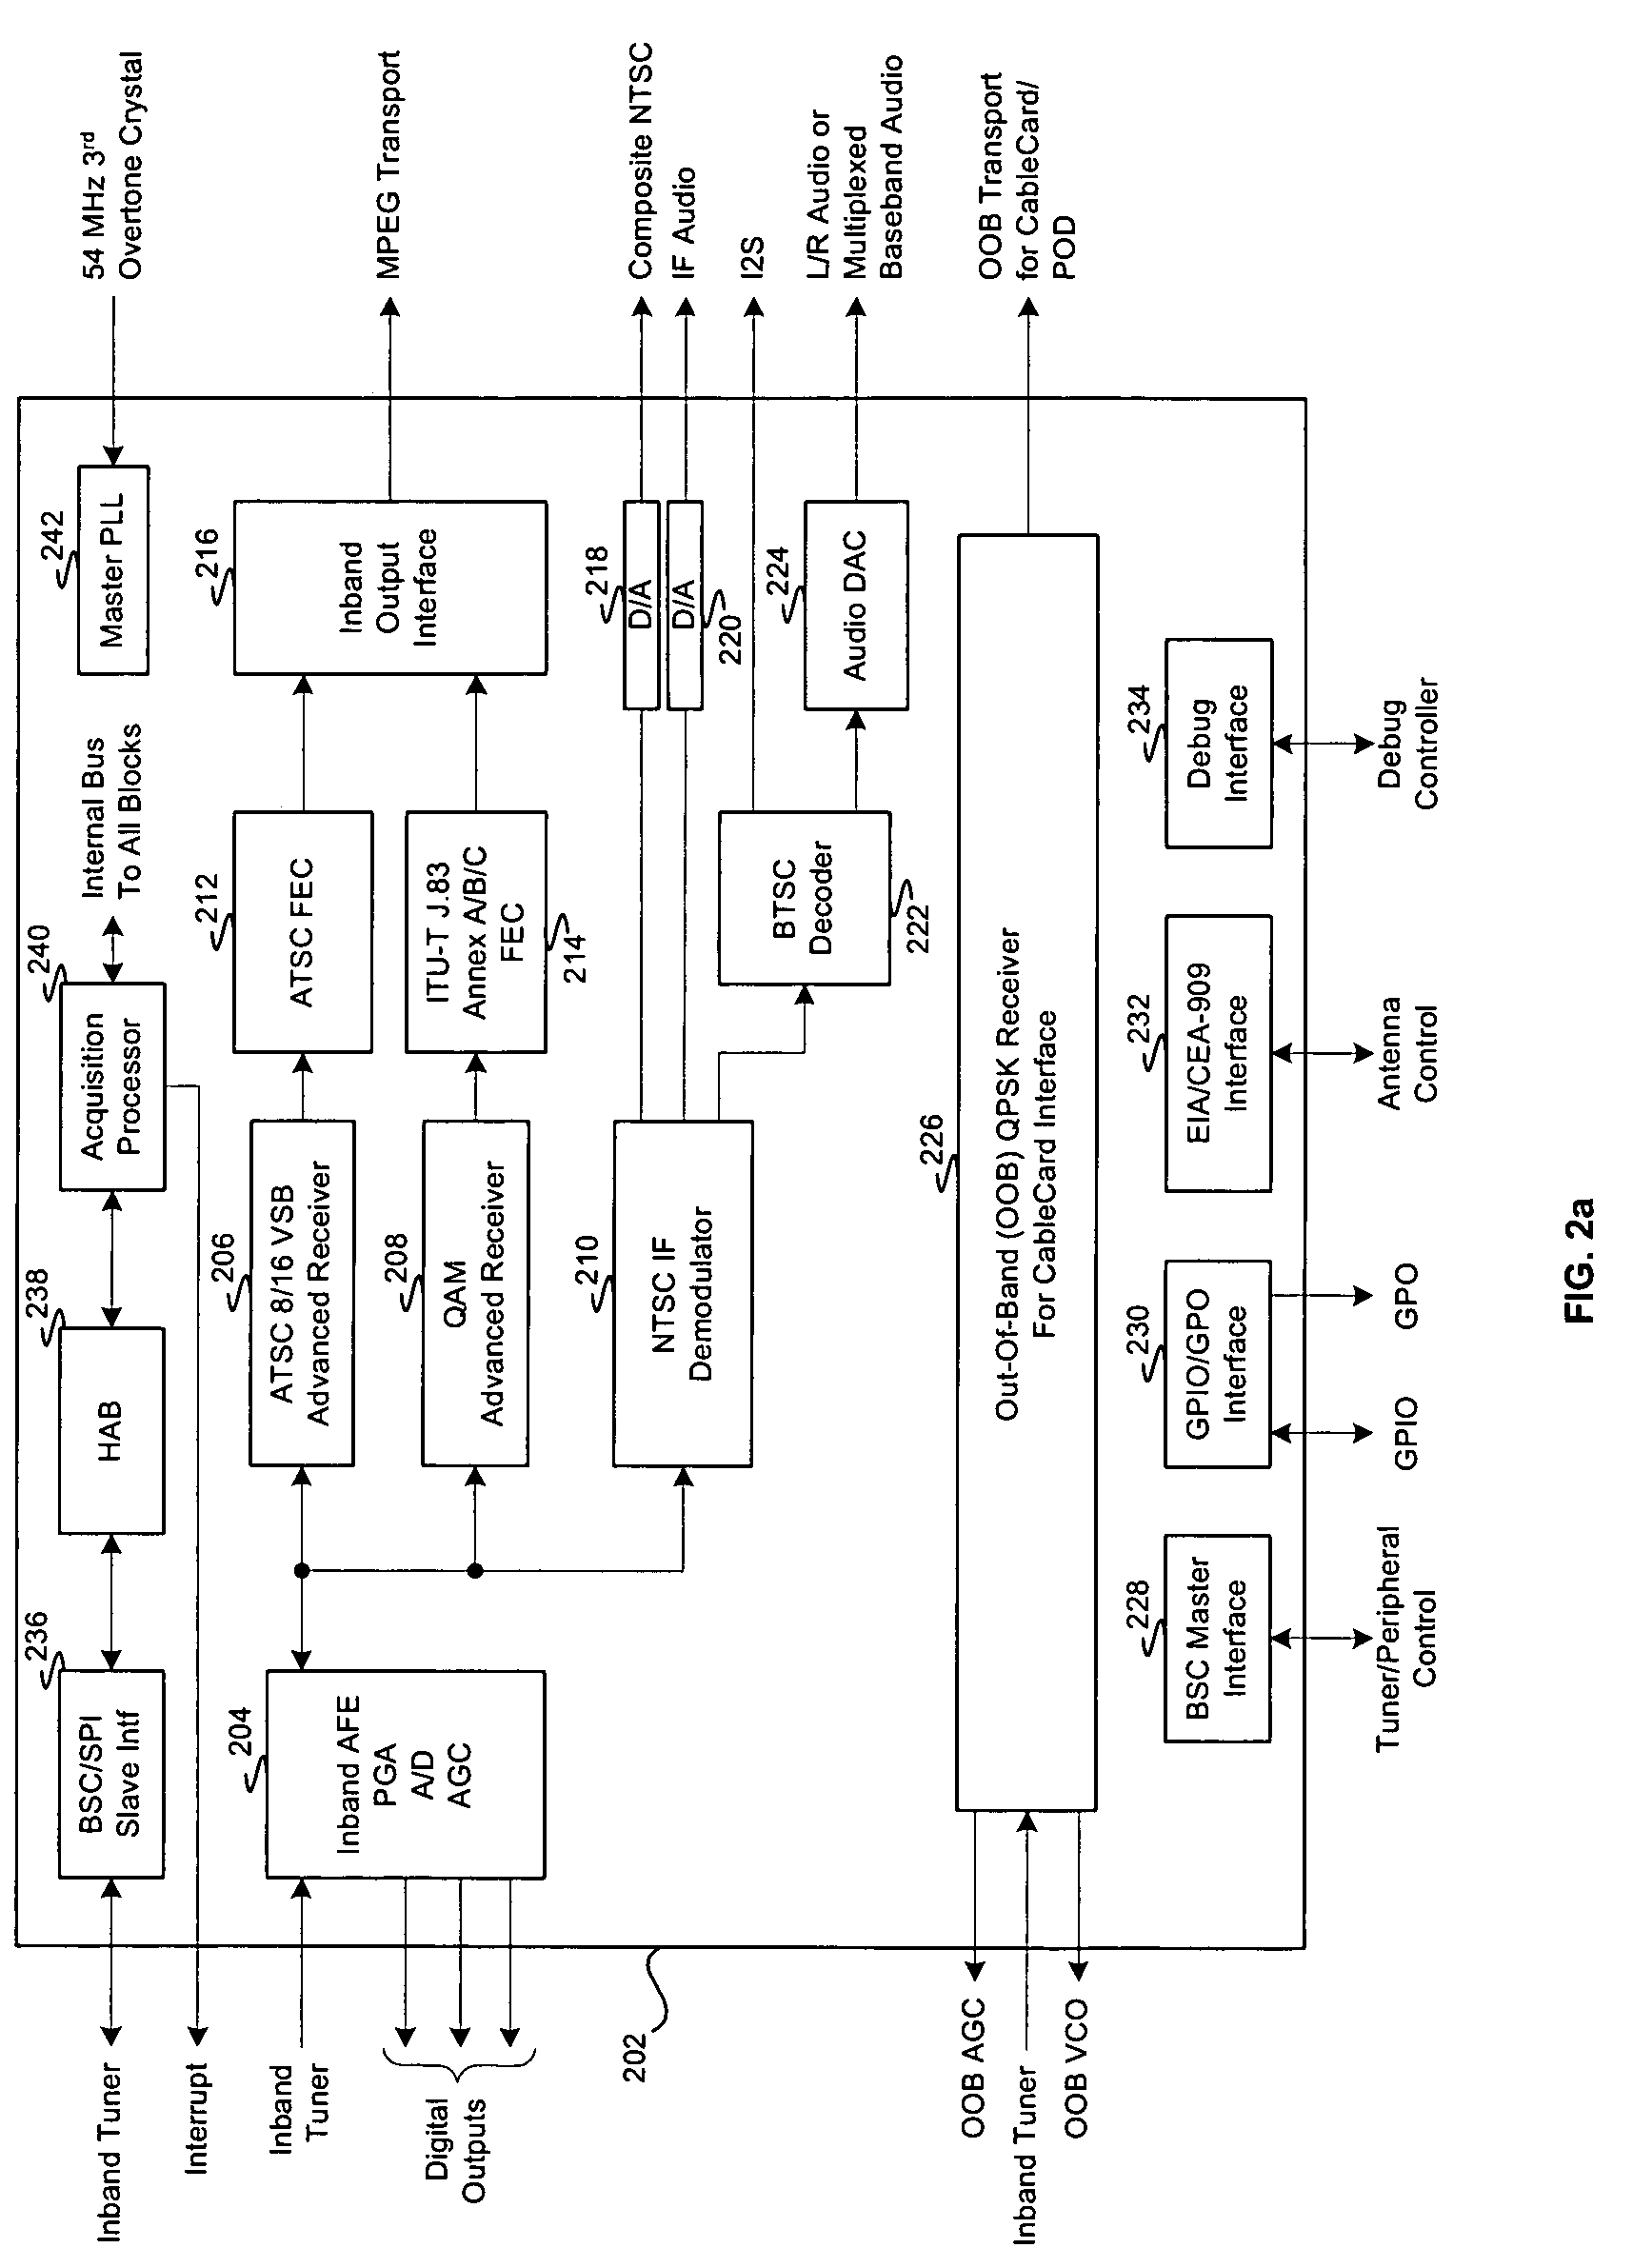 Method and system for an integrated VSB/QAM/NTSC/OOB plug-and-play DTV receiver